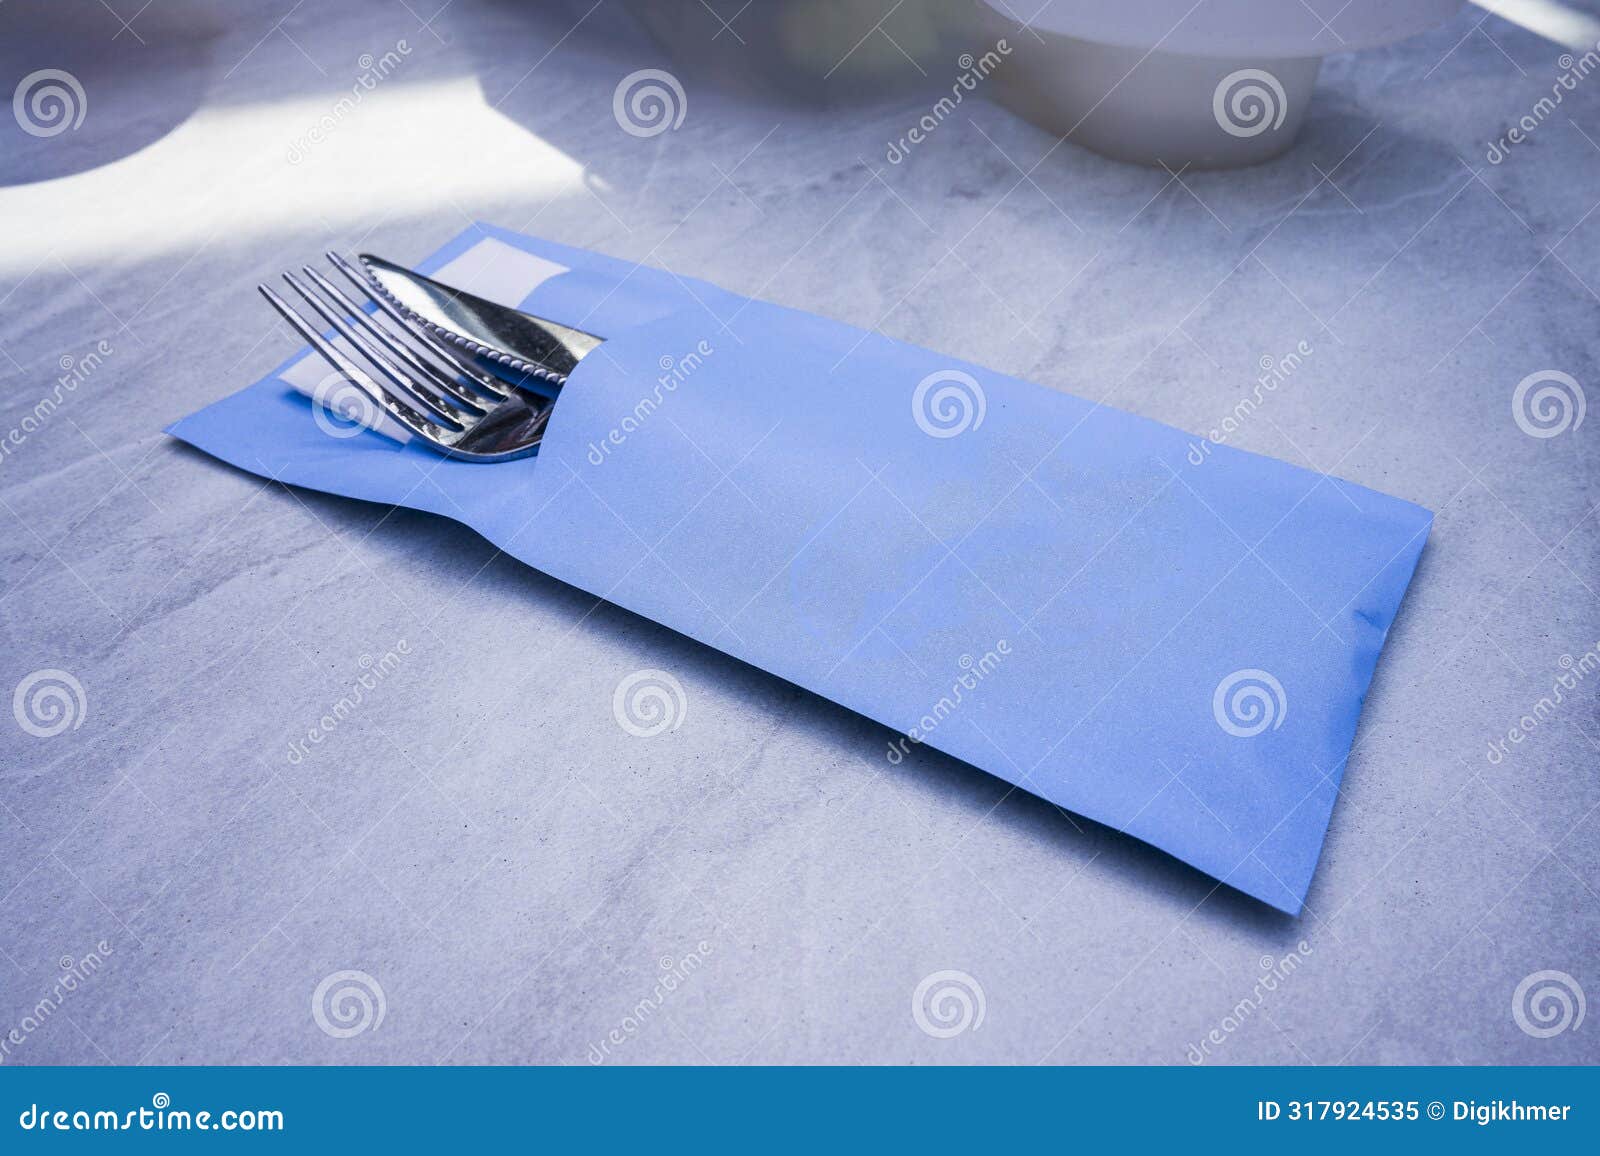 cutlery set with fork, knife, and tissue wrapped inside a blue paper envelope